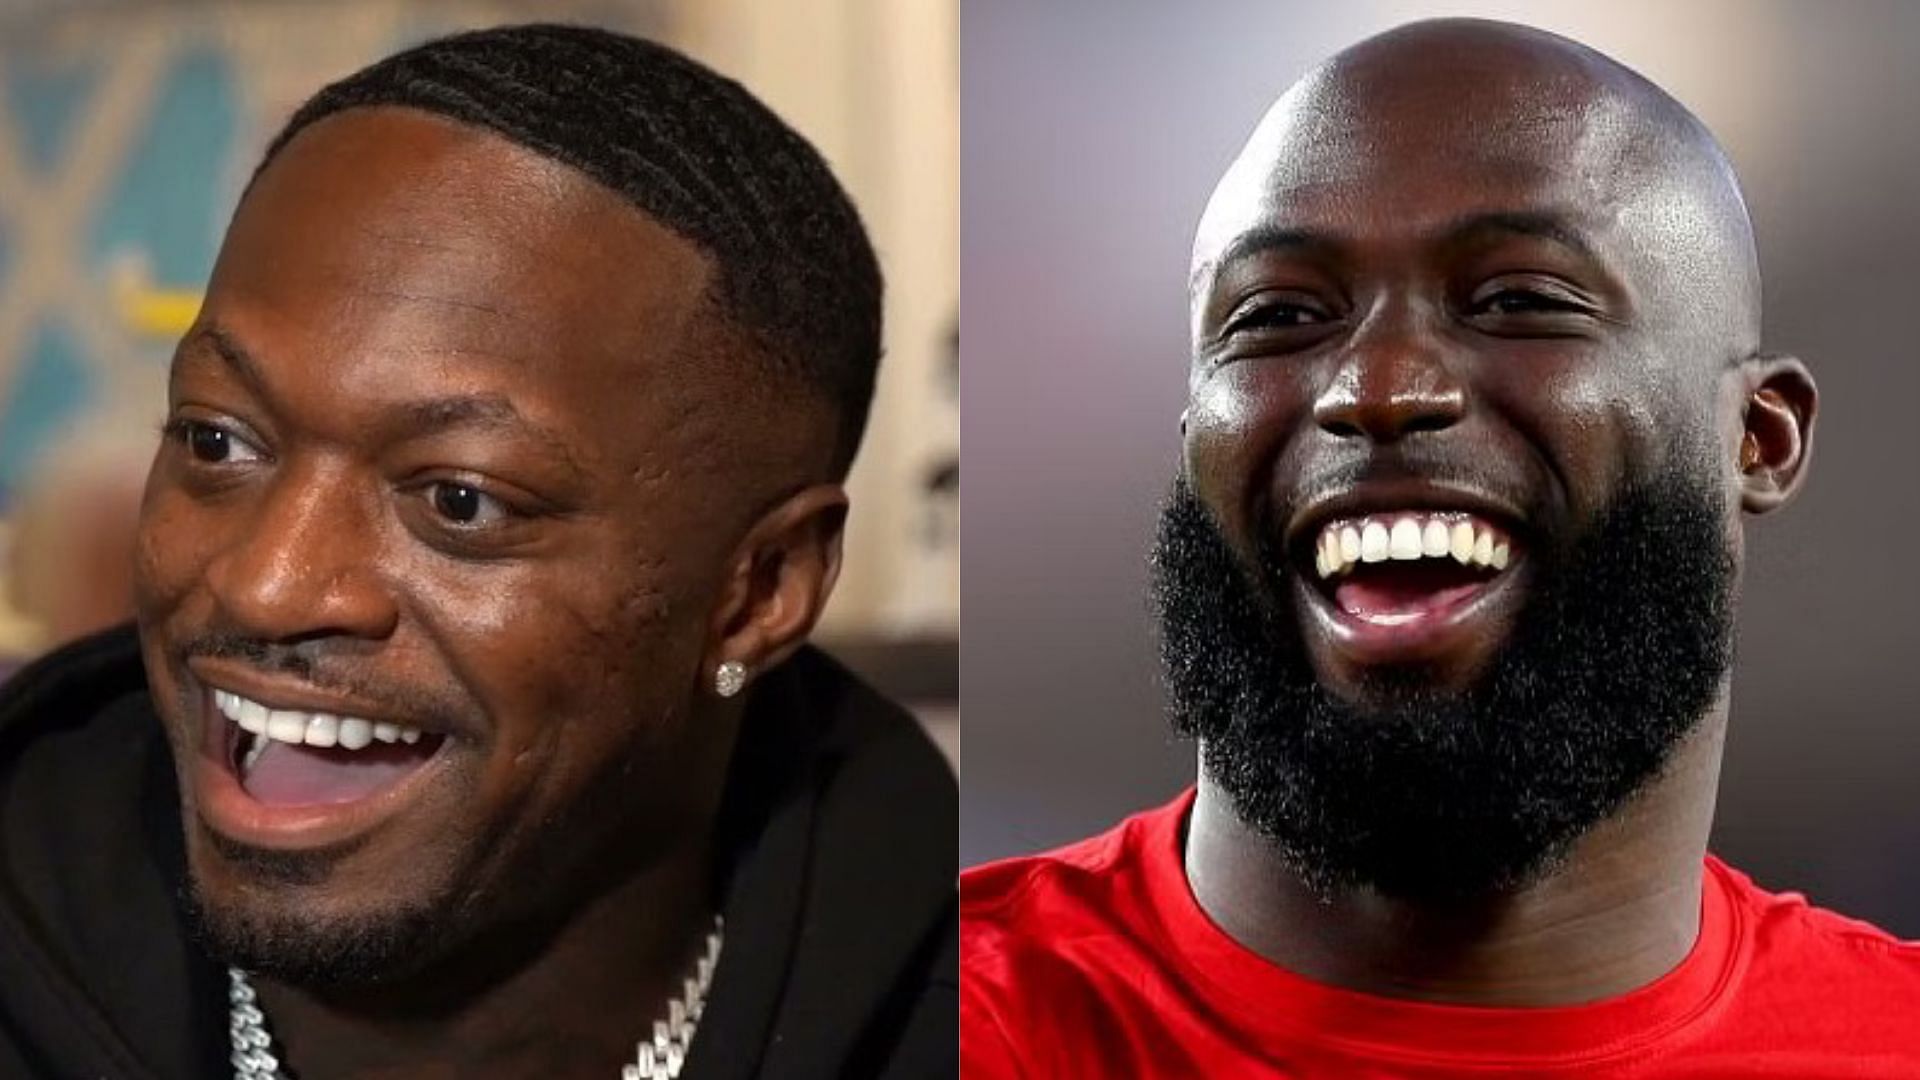 Hilarity ensued when YouTuber Funny Marco asked Leonard Fournette how much he pays his barber. (Image credit: YouTube/Funny Marco)